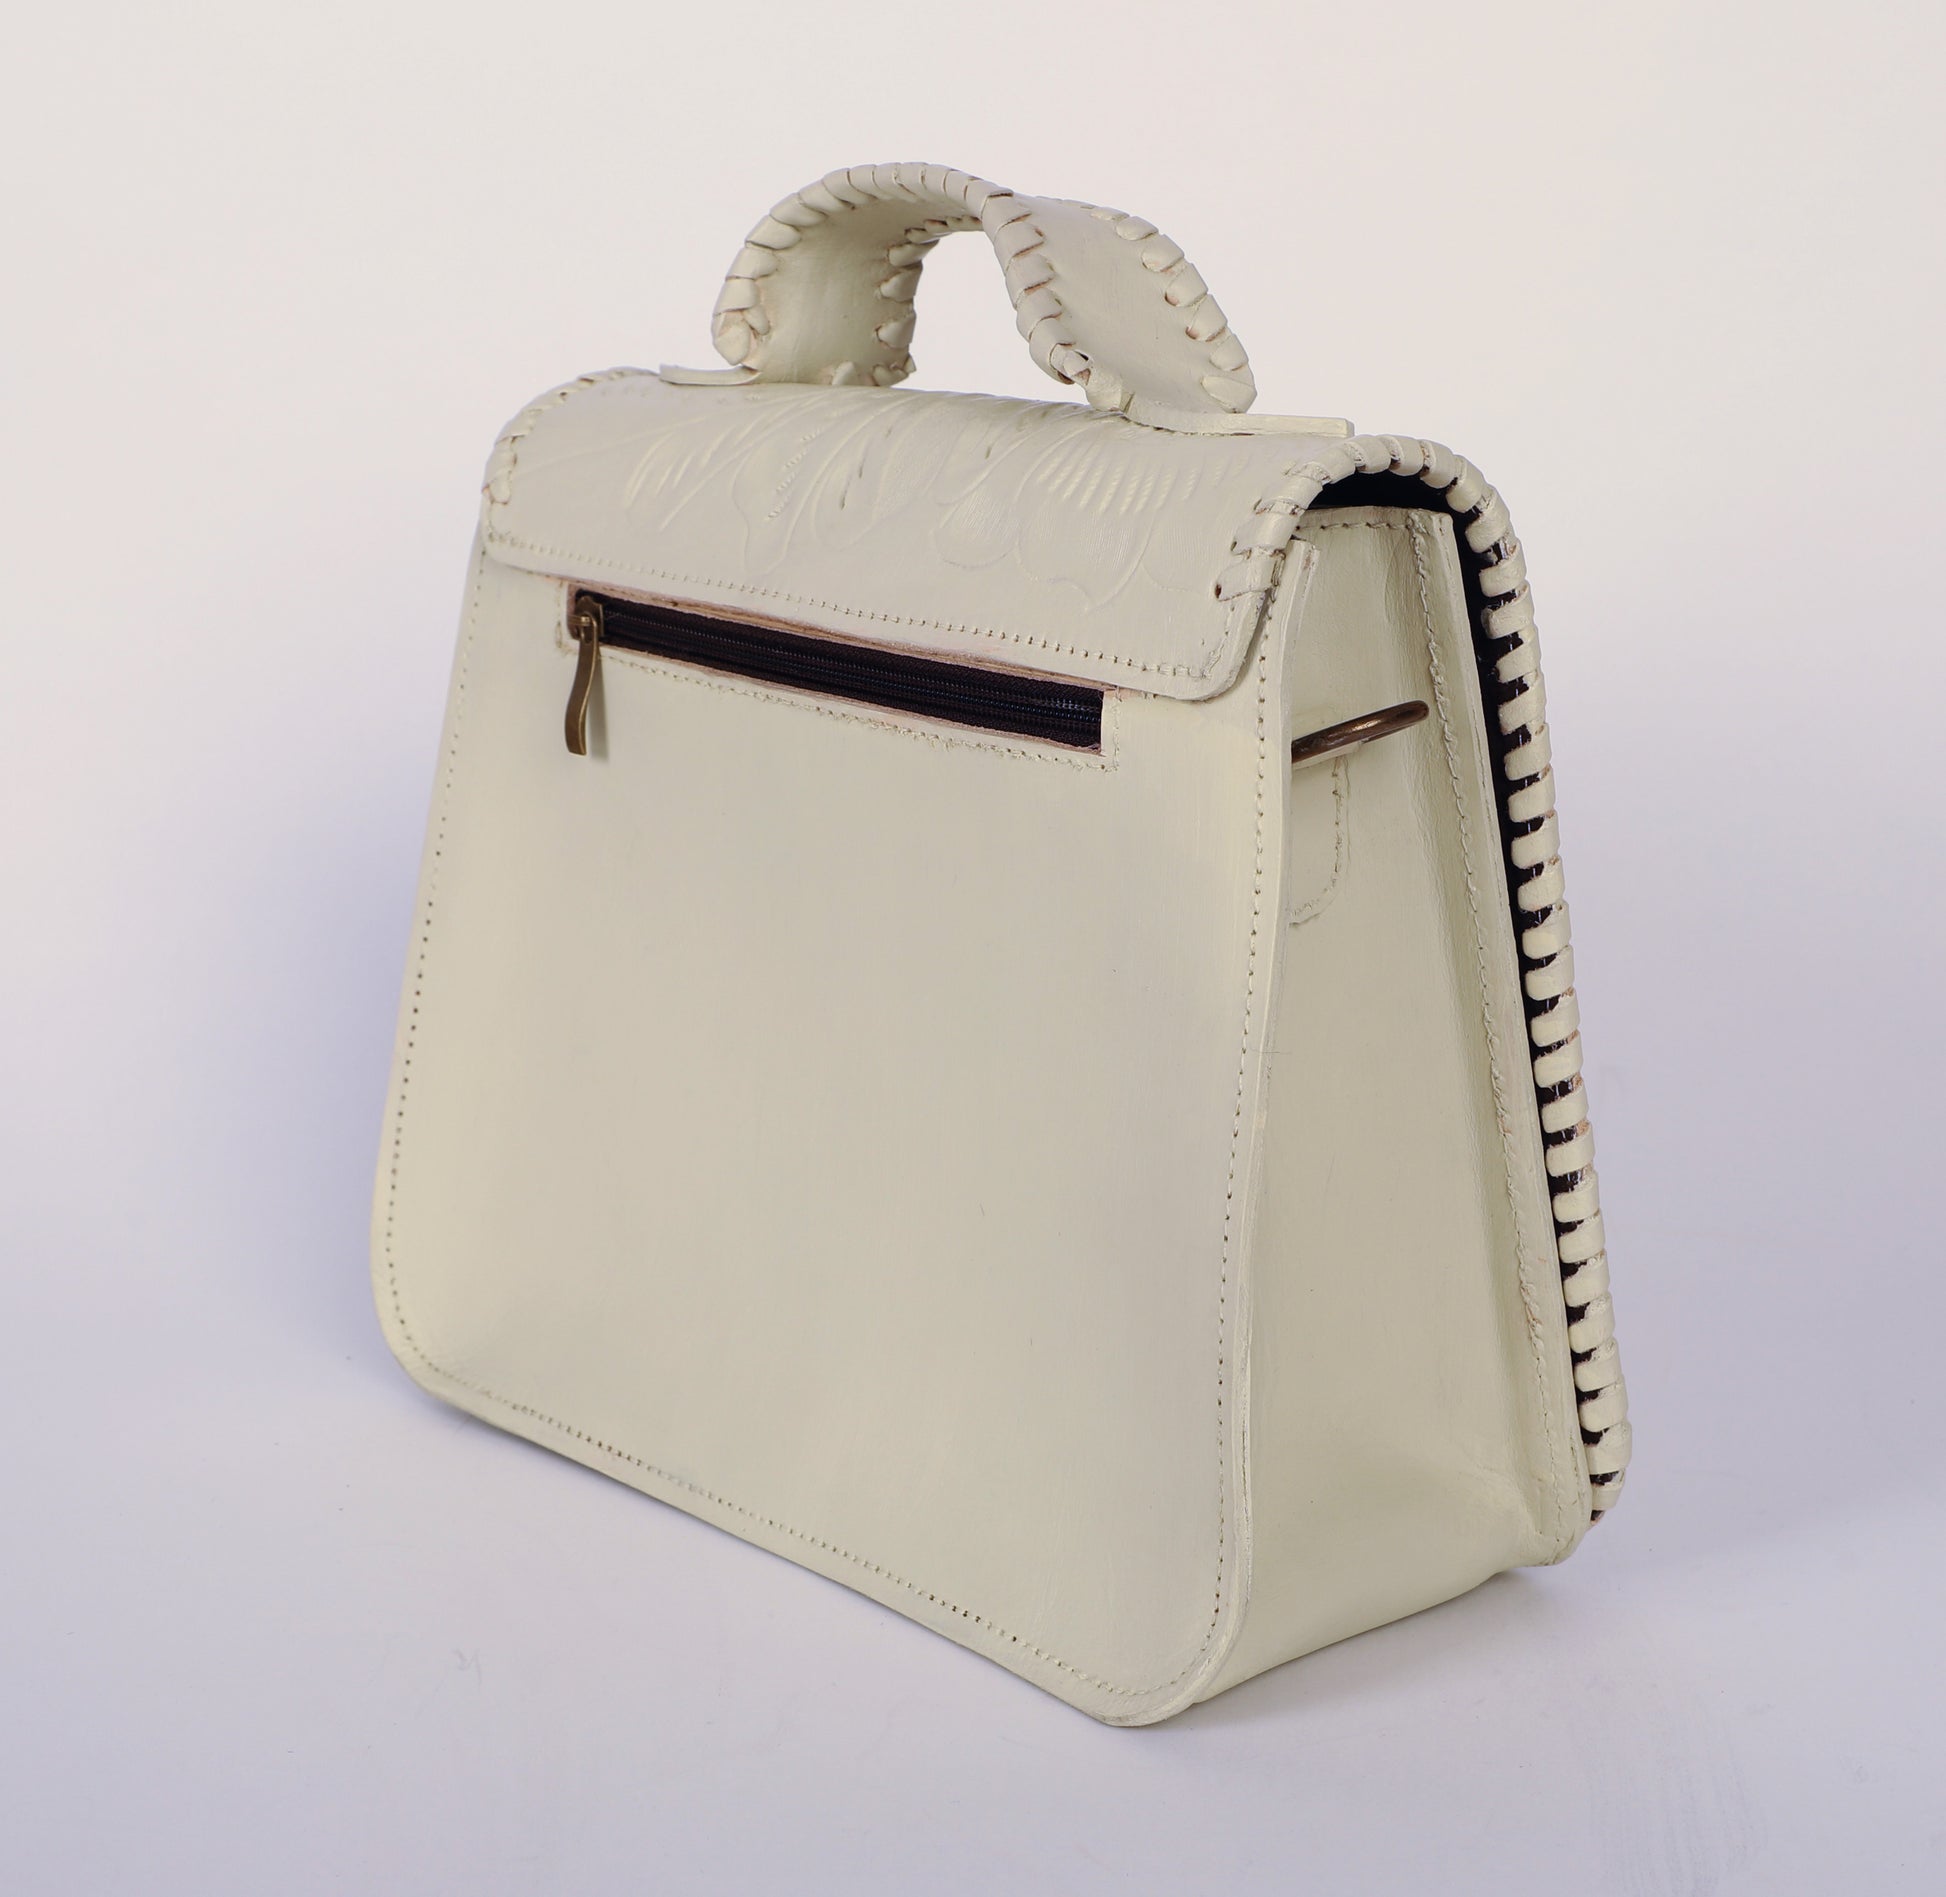 Medium-sized authentic leather handbag with a traditional mexican etching design on the upper flap. Braided handle on top. Fully lined with suede.  Back side view showing zipper and hook to hang crossbody strap. In Color white.